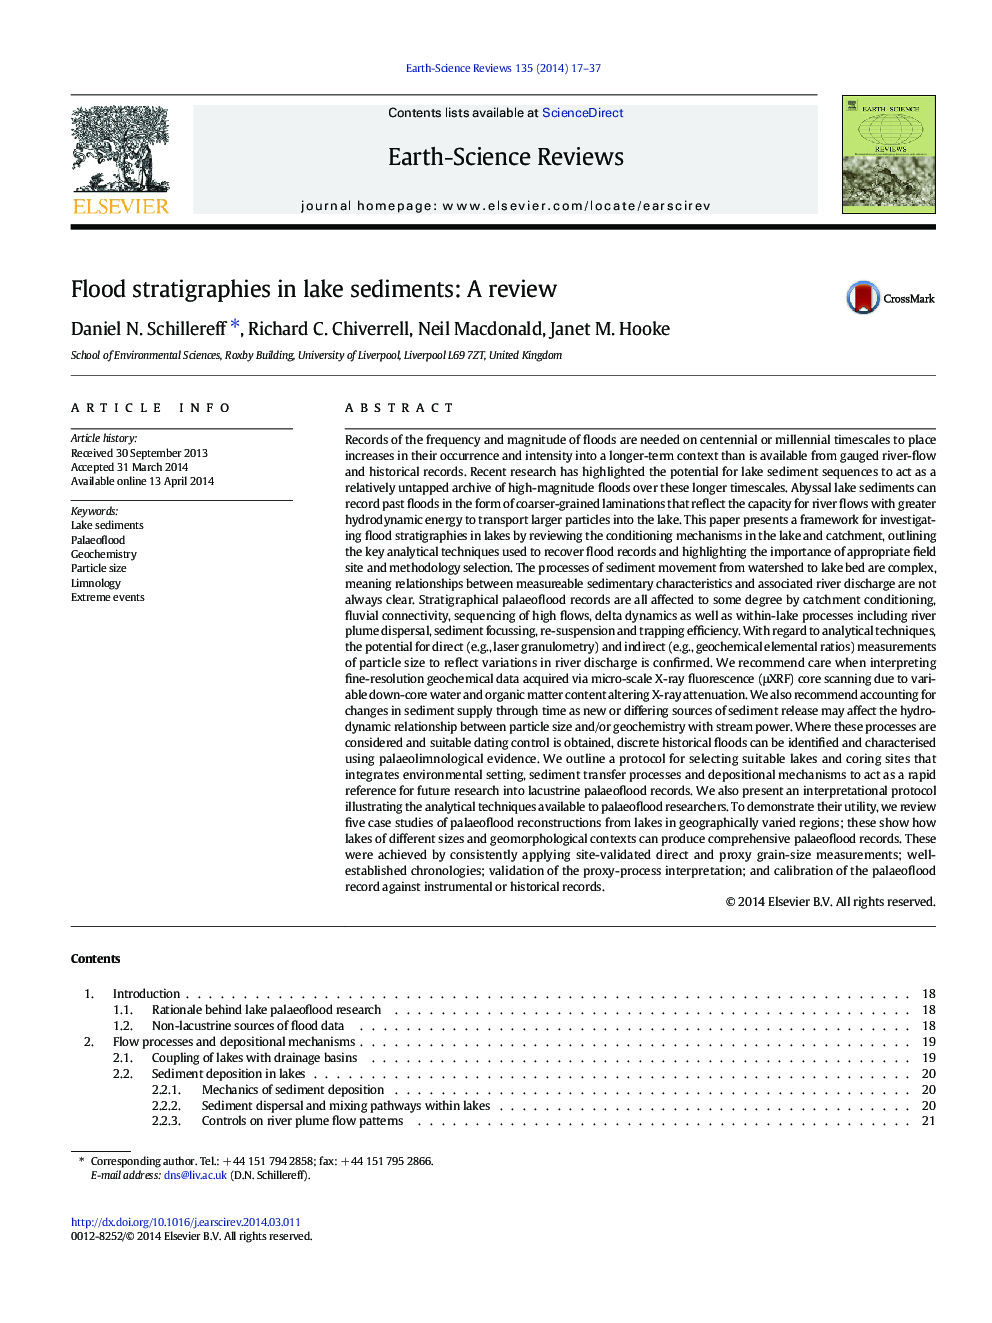 Flood stratigraphies in lake sediments: A review